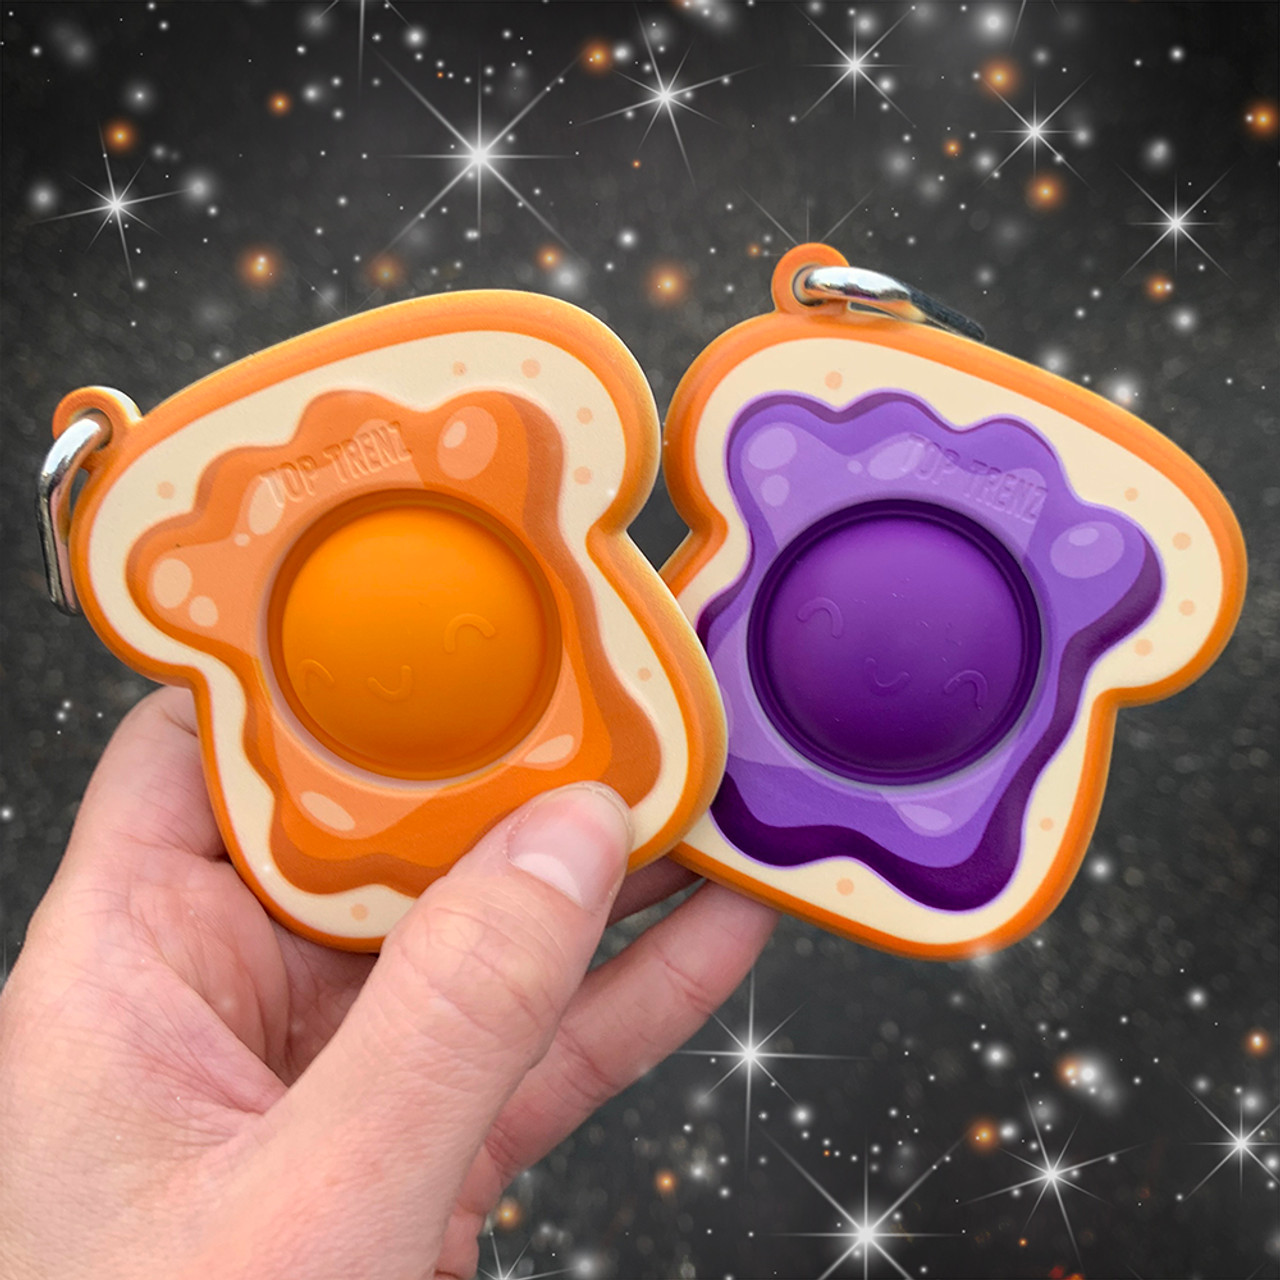 OMG Mega Pop Best Friend Keychains  - Peanut butter and jelly are the fidget toy of the year